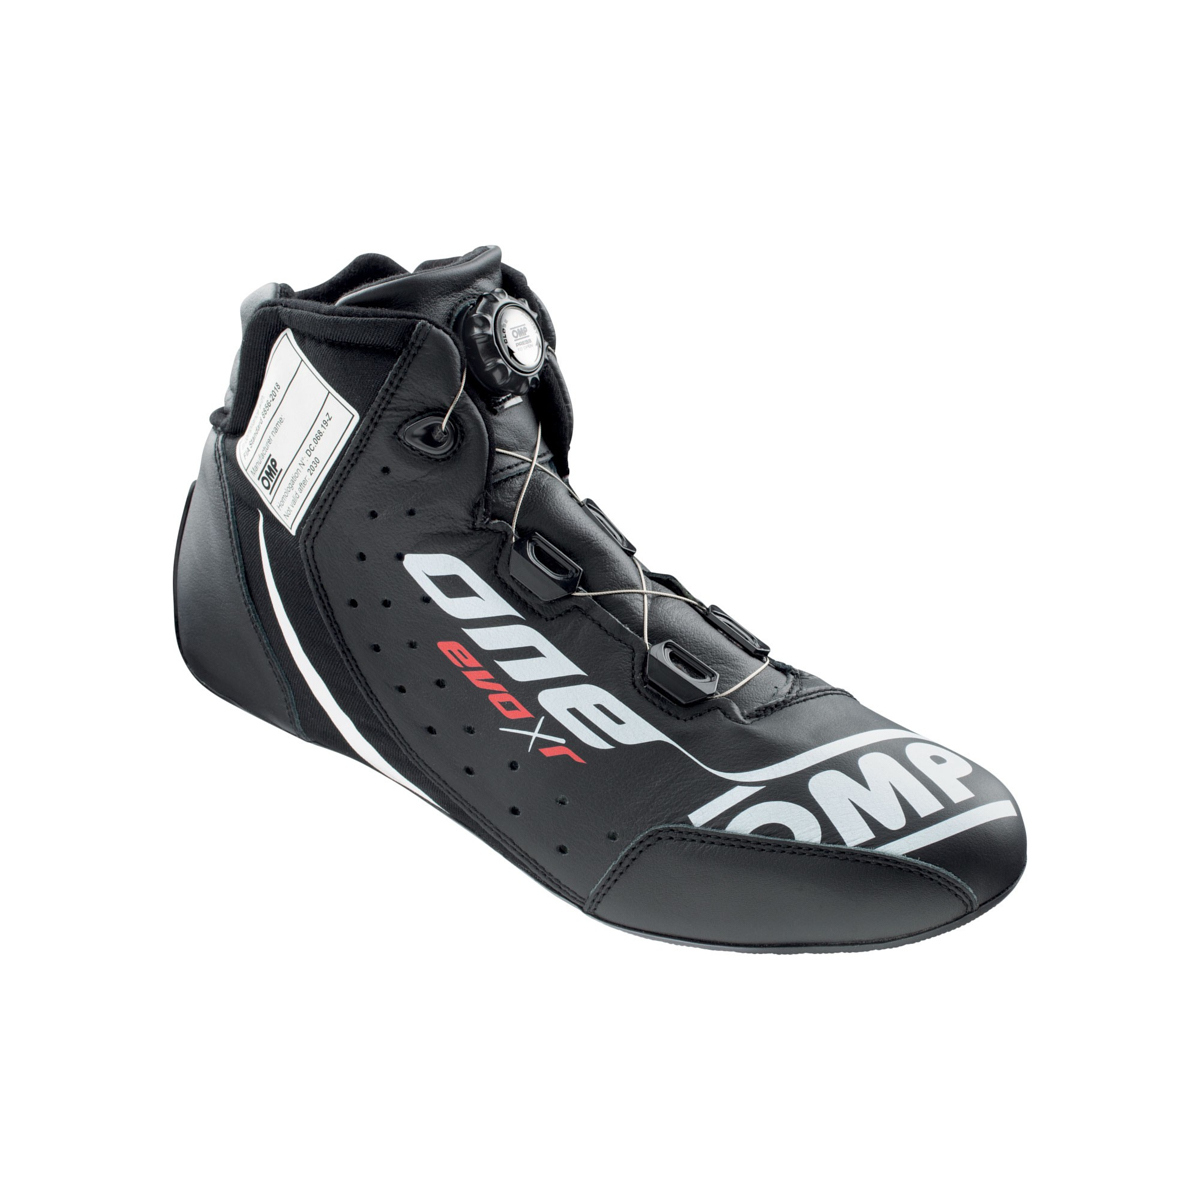 OMP Racing IC805E07147 Driving Shoe, One Evo X R, Mid-Top, FIA Approved, Leather Outer, Fire Retardant Fabric Inner, Black Euro Size 47, Pair